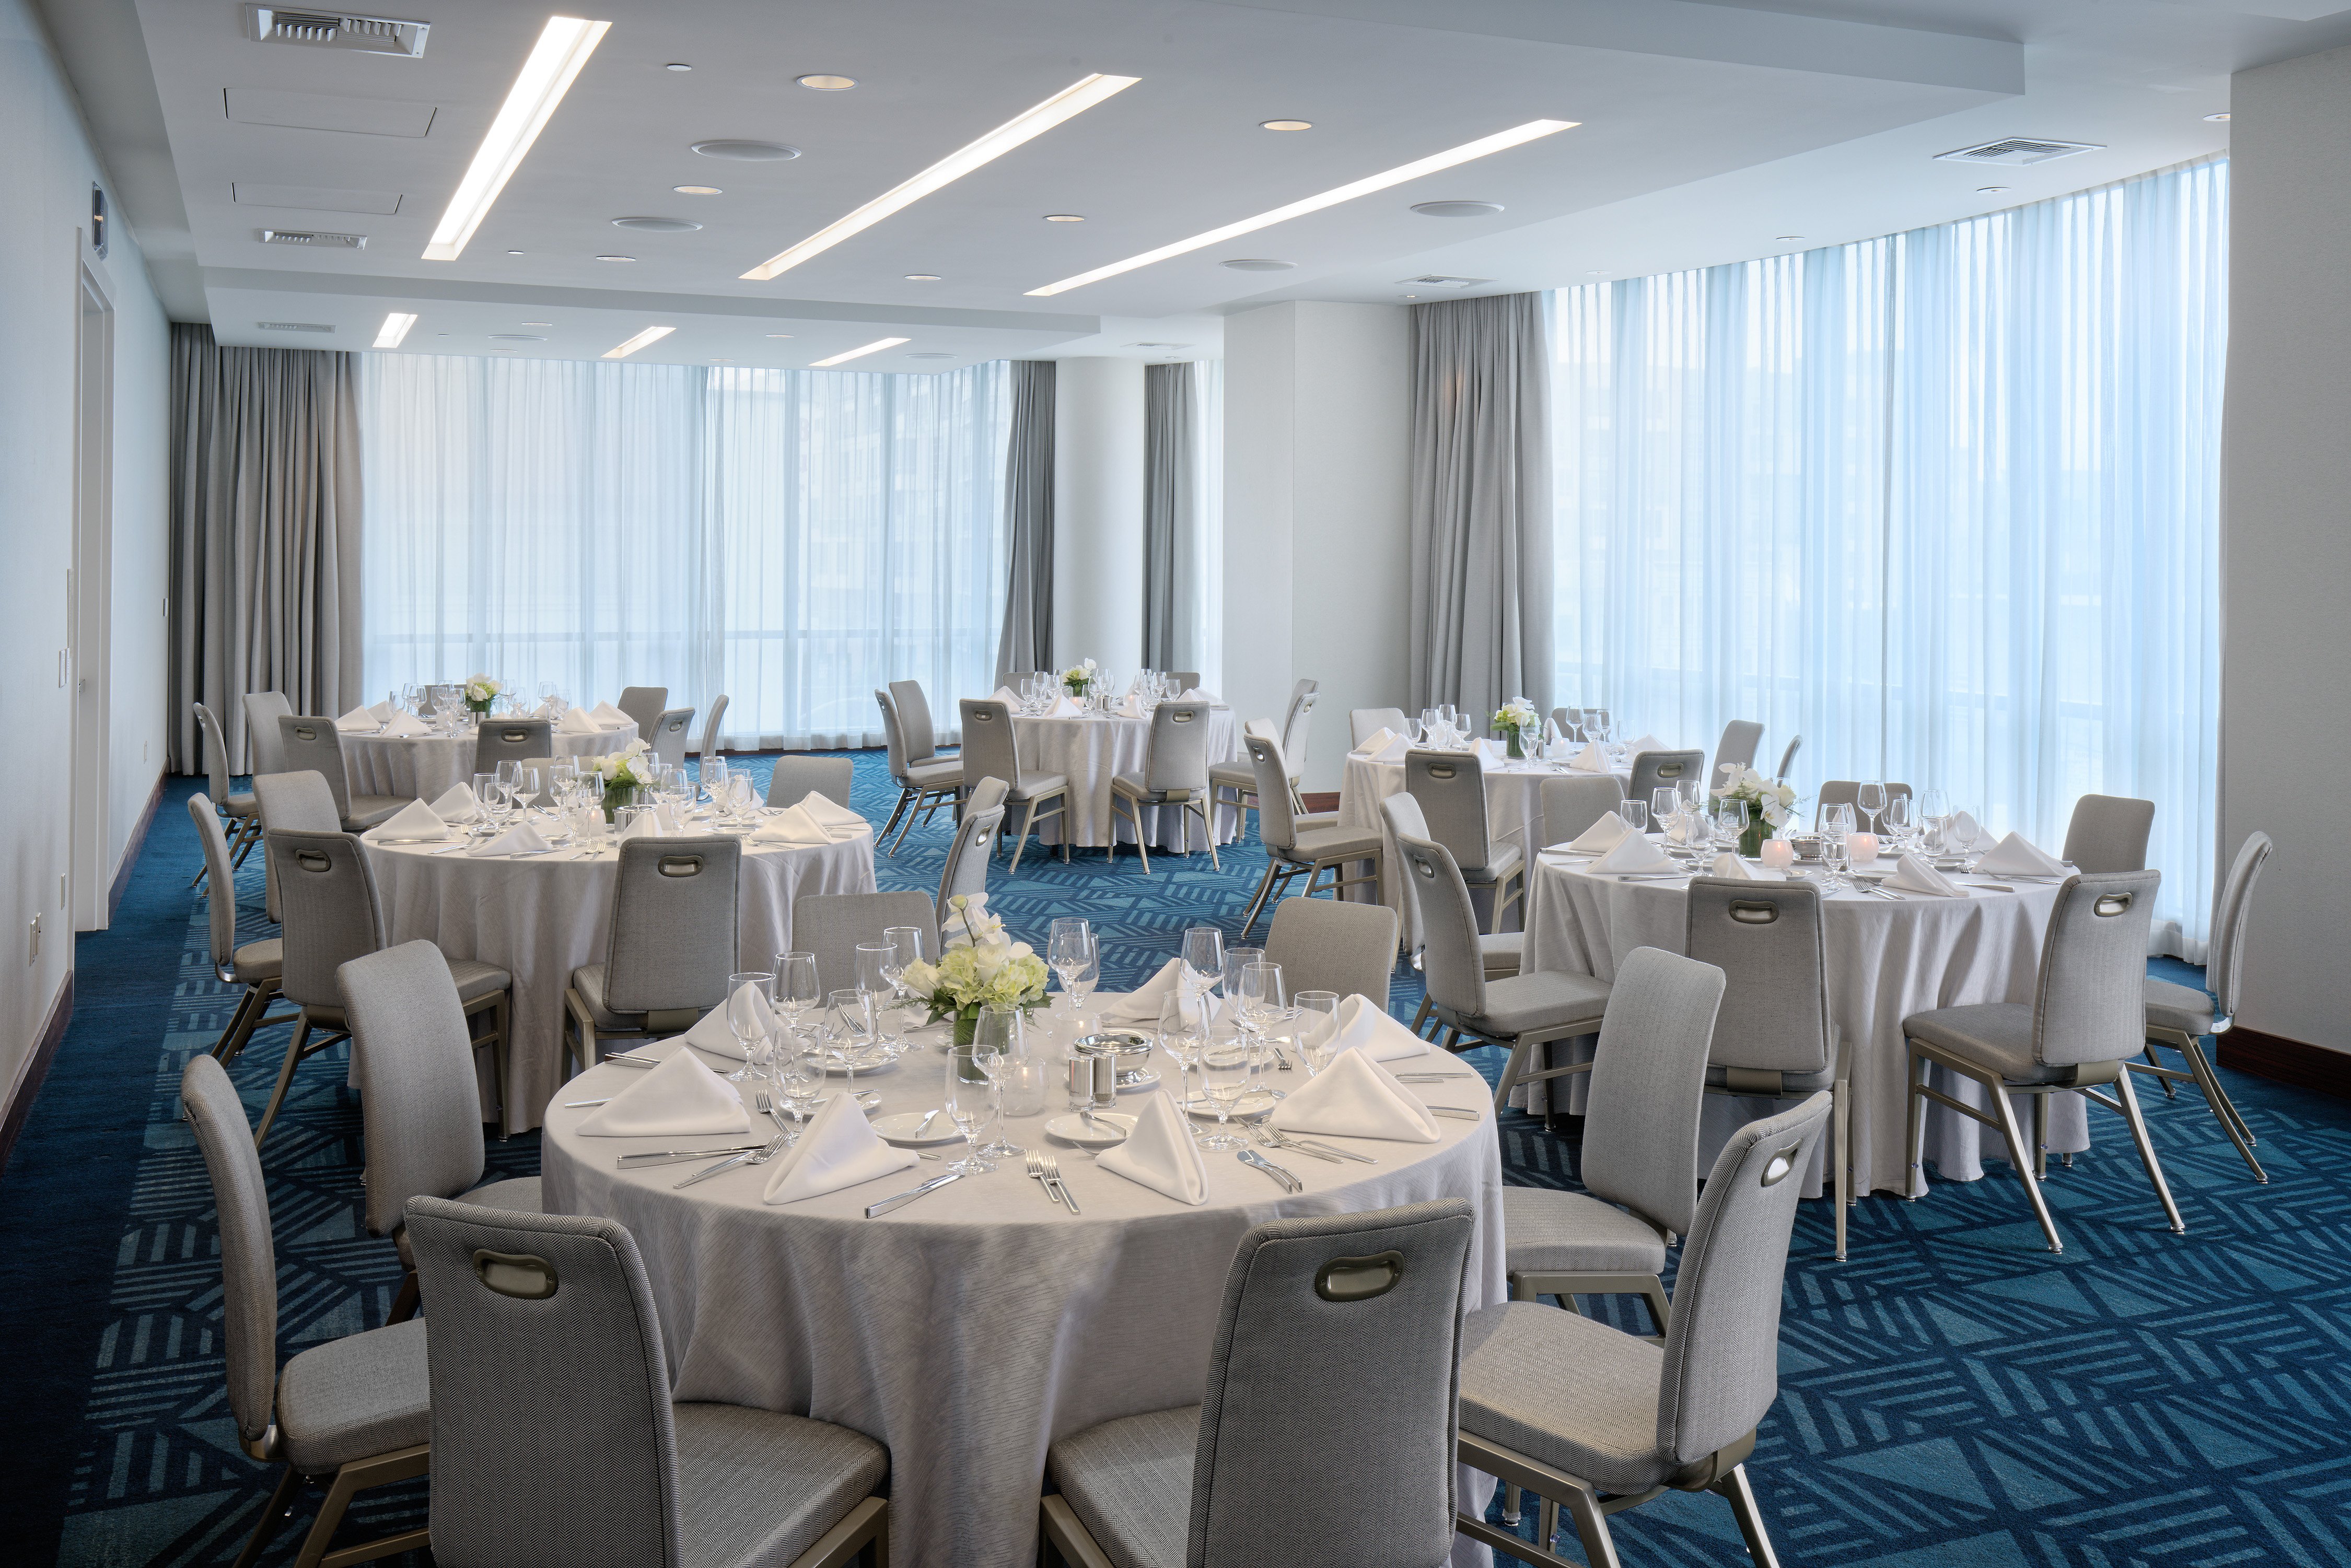 Light-filled room perfect for banquets or meetings